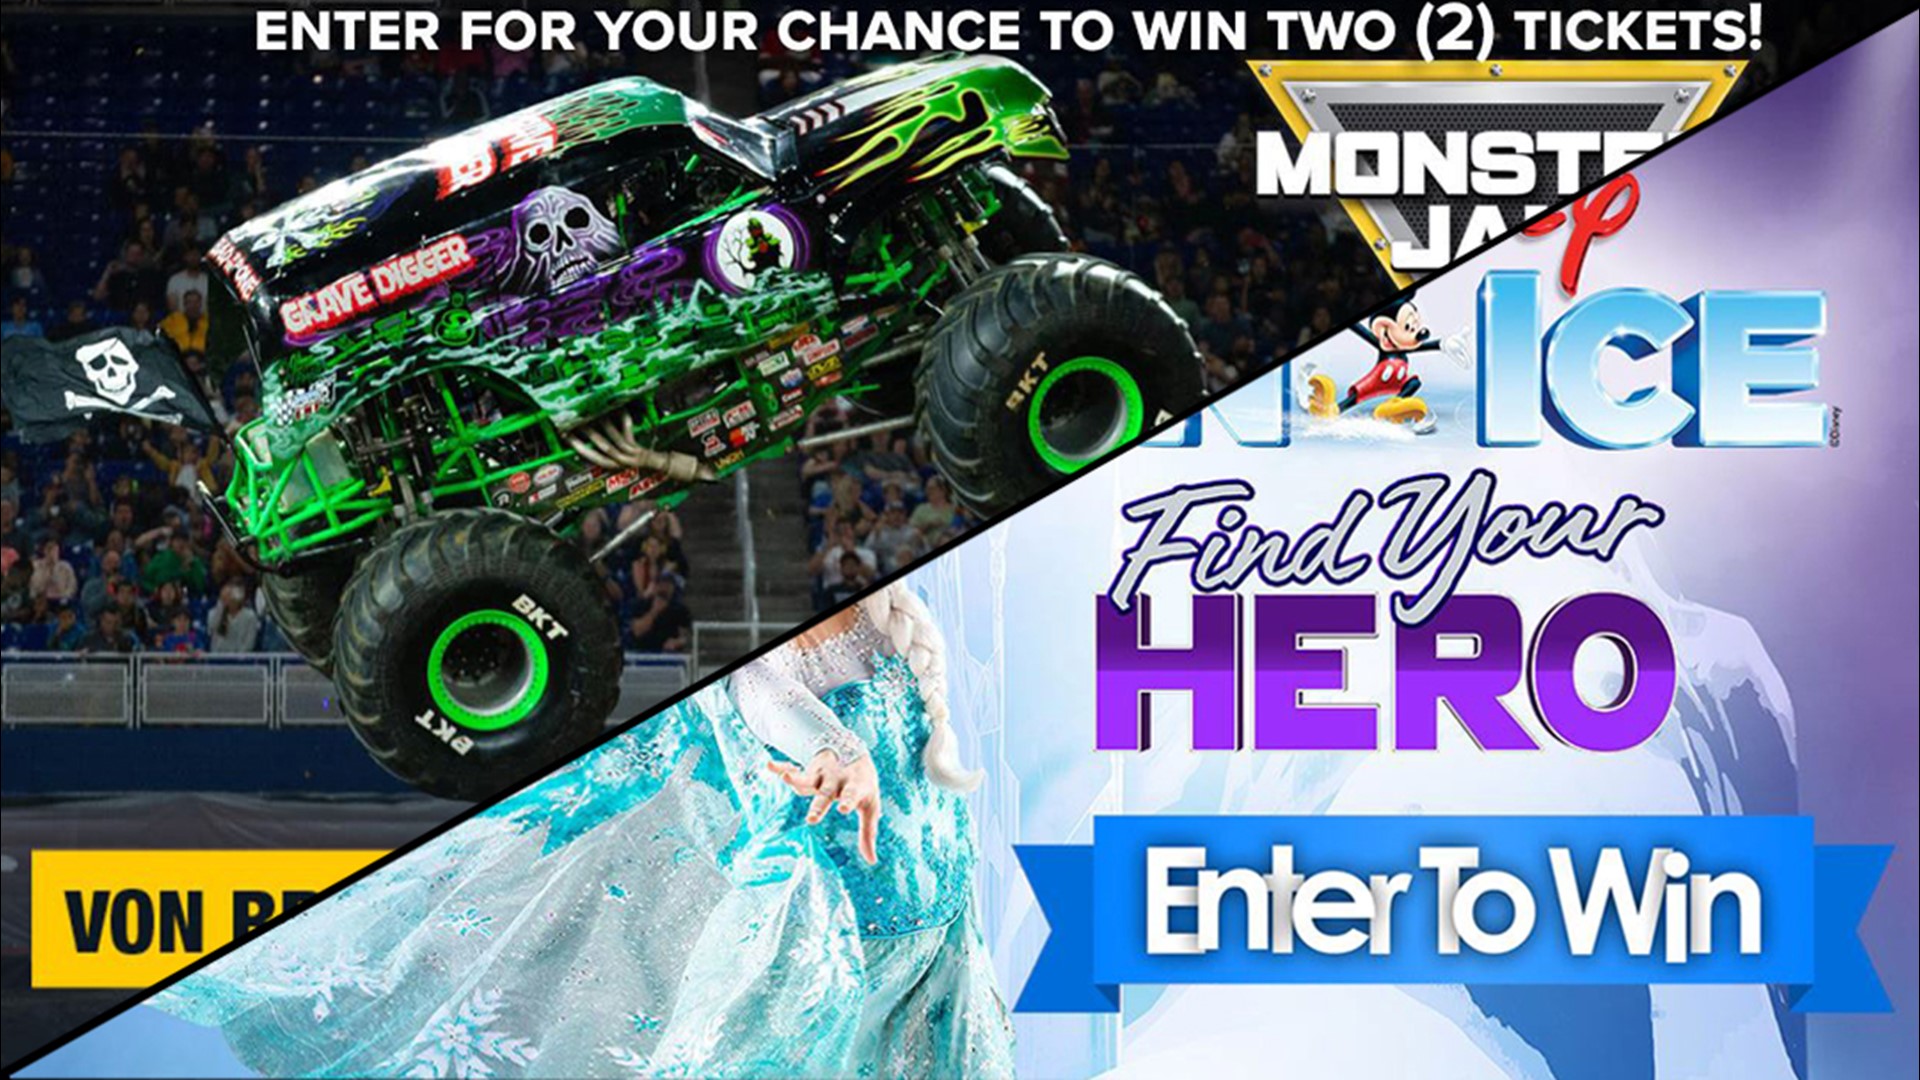 Enter to win free tickets to Monster Jam or Disney on Ice at the VBC!